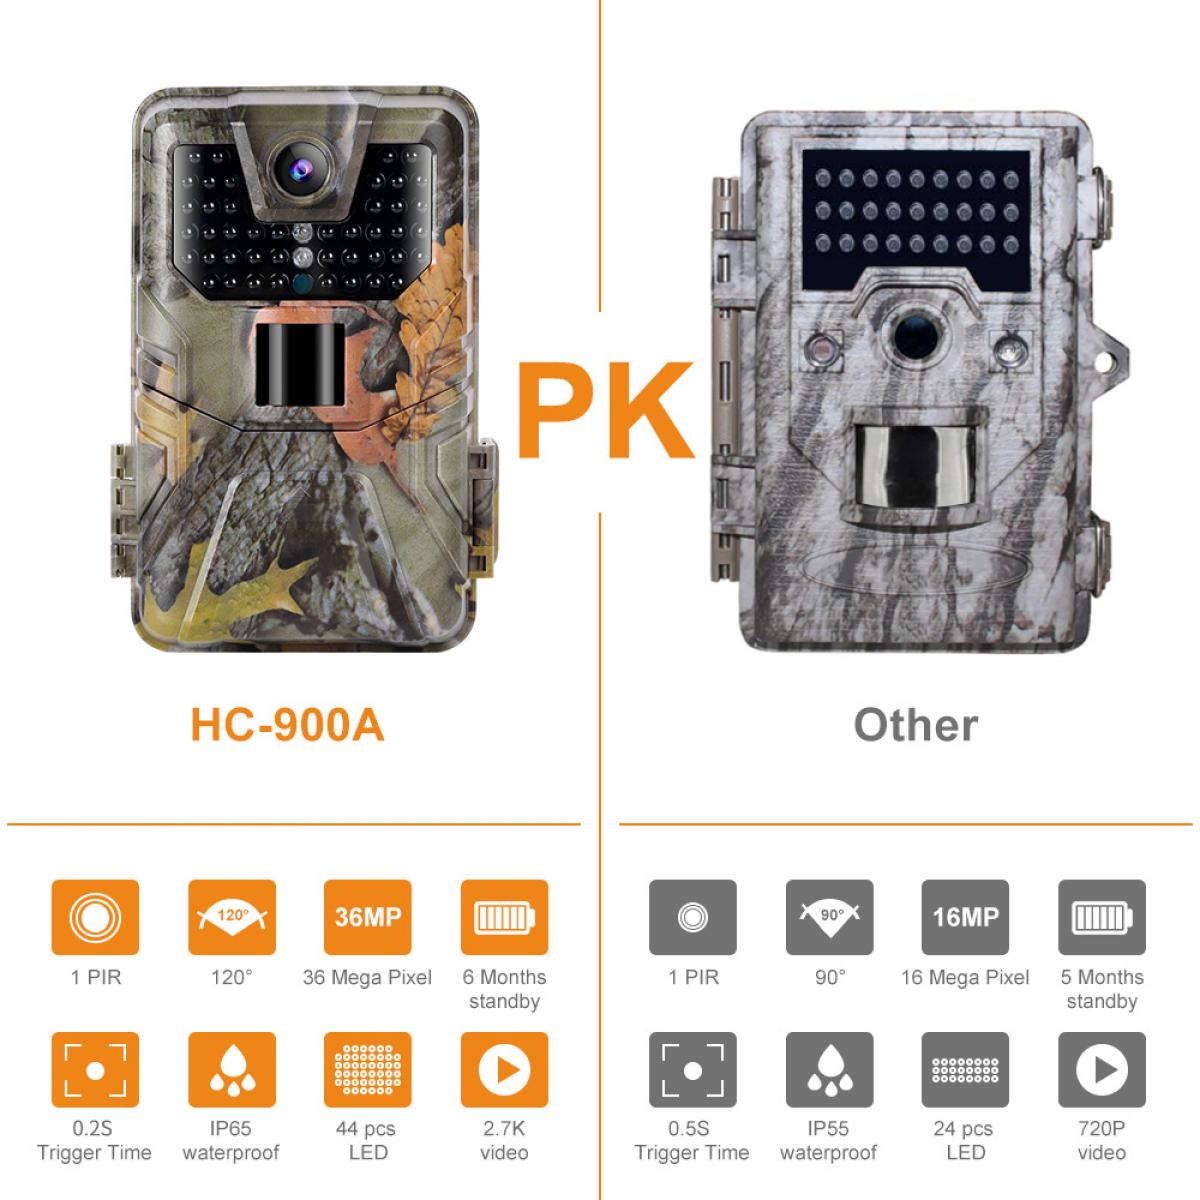 K&F HC-900A 20MP/0.3 seconds Trigger/1 PIR HD Outdoor trail camera Waterproof Hunting Infrared Night Vision Camera